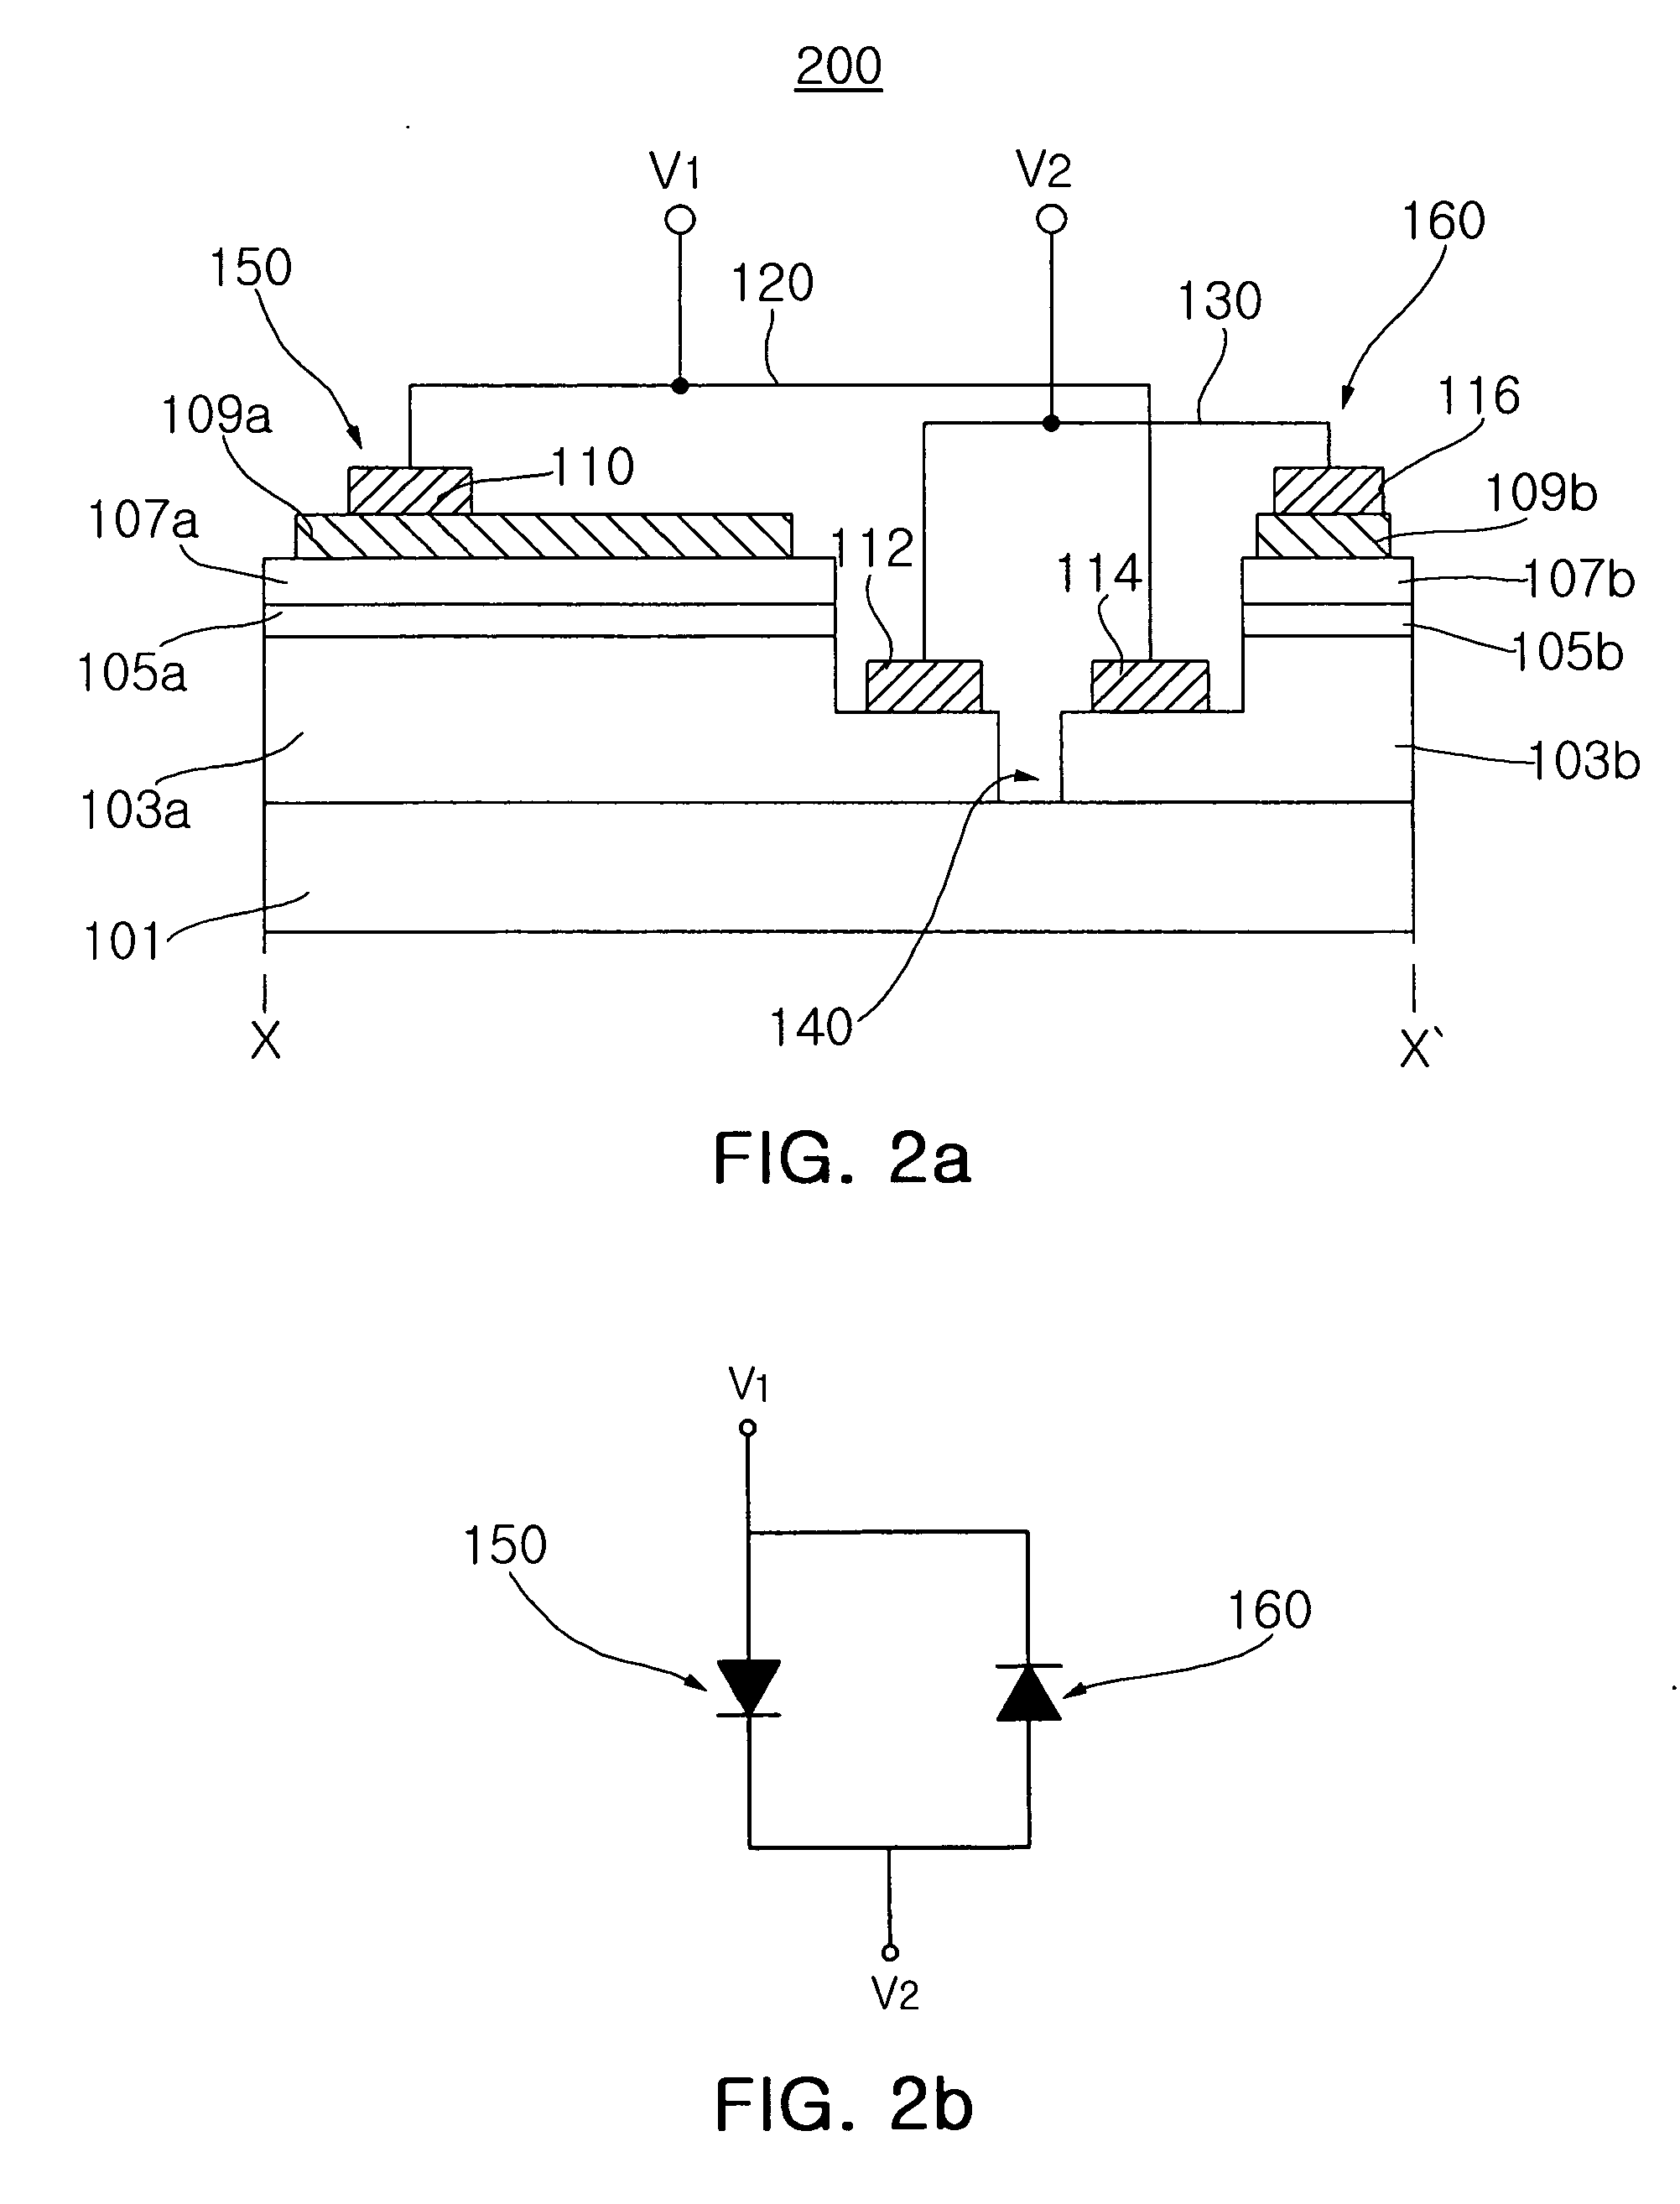 Gallium nitride-based light emitting device having light emitting diode for protecting electrostatic discharge, and melthod for manufacturing the same